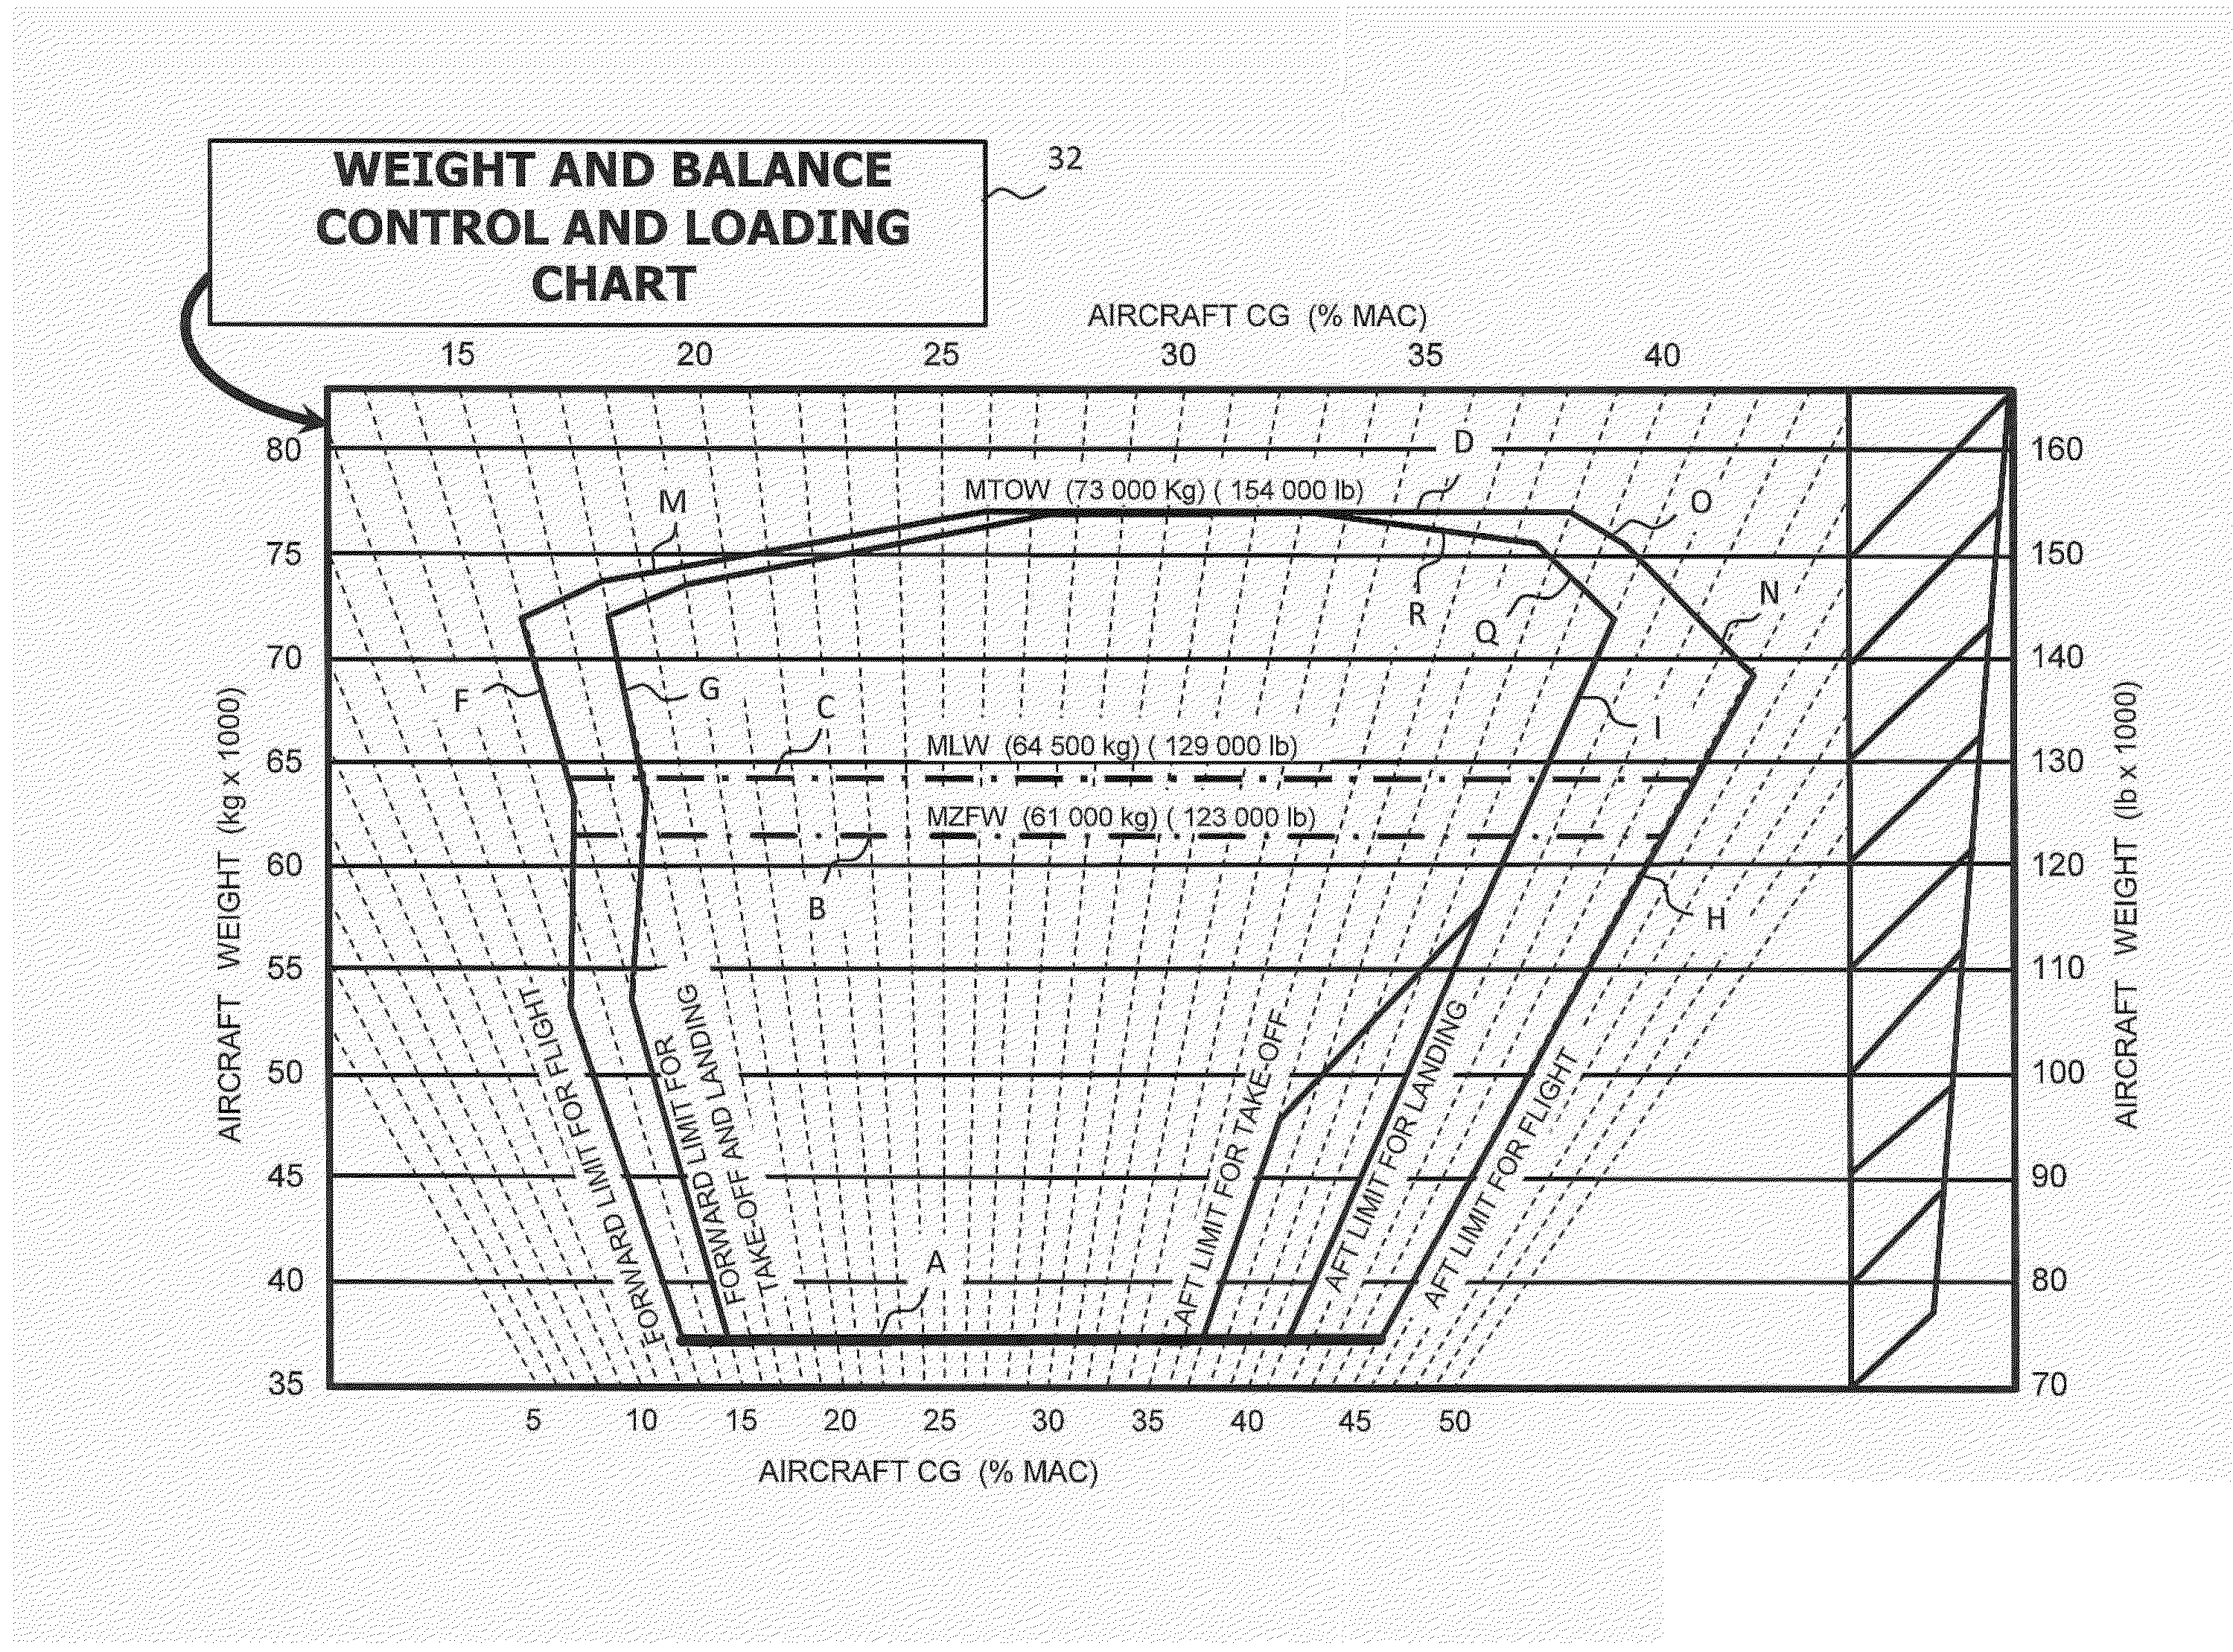 Method for expanding aircraft center of gravity limitations